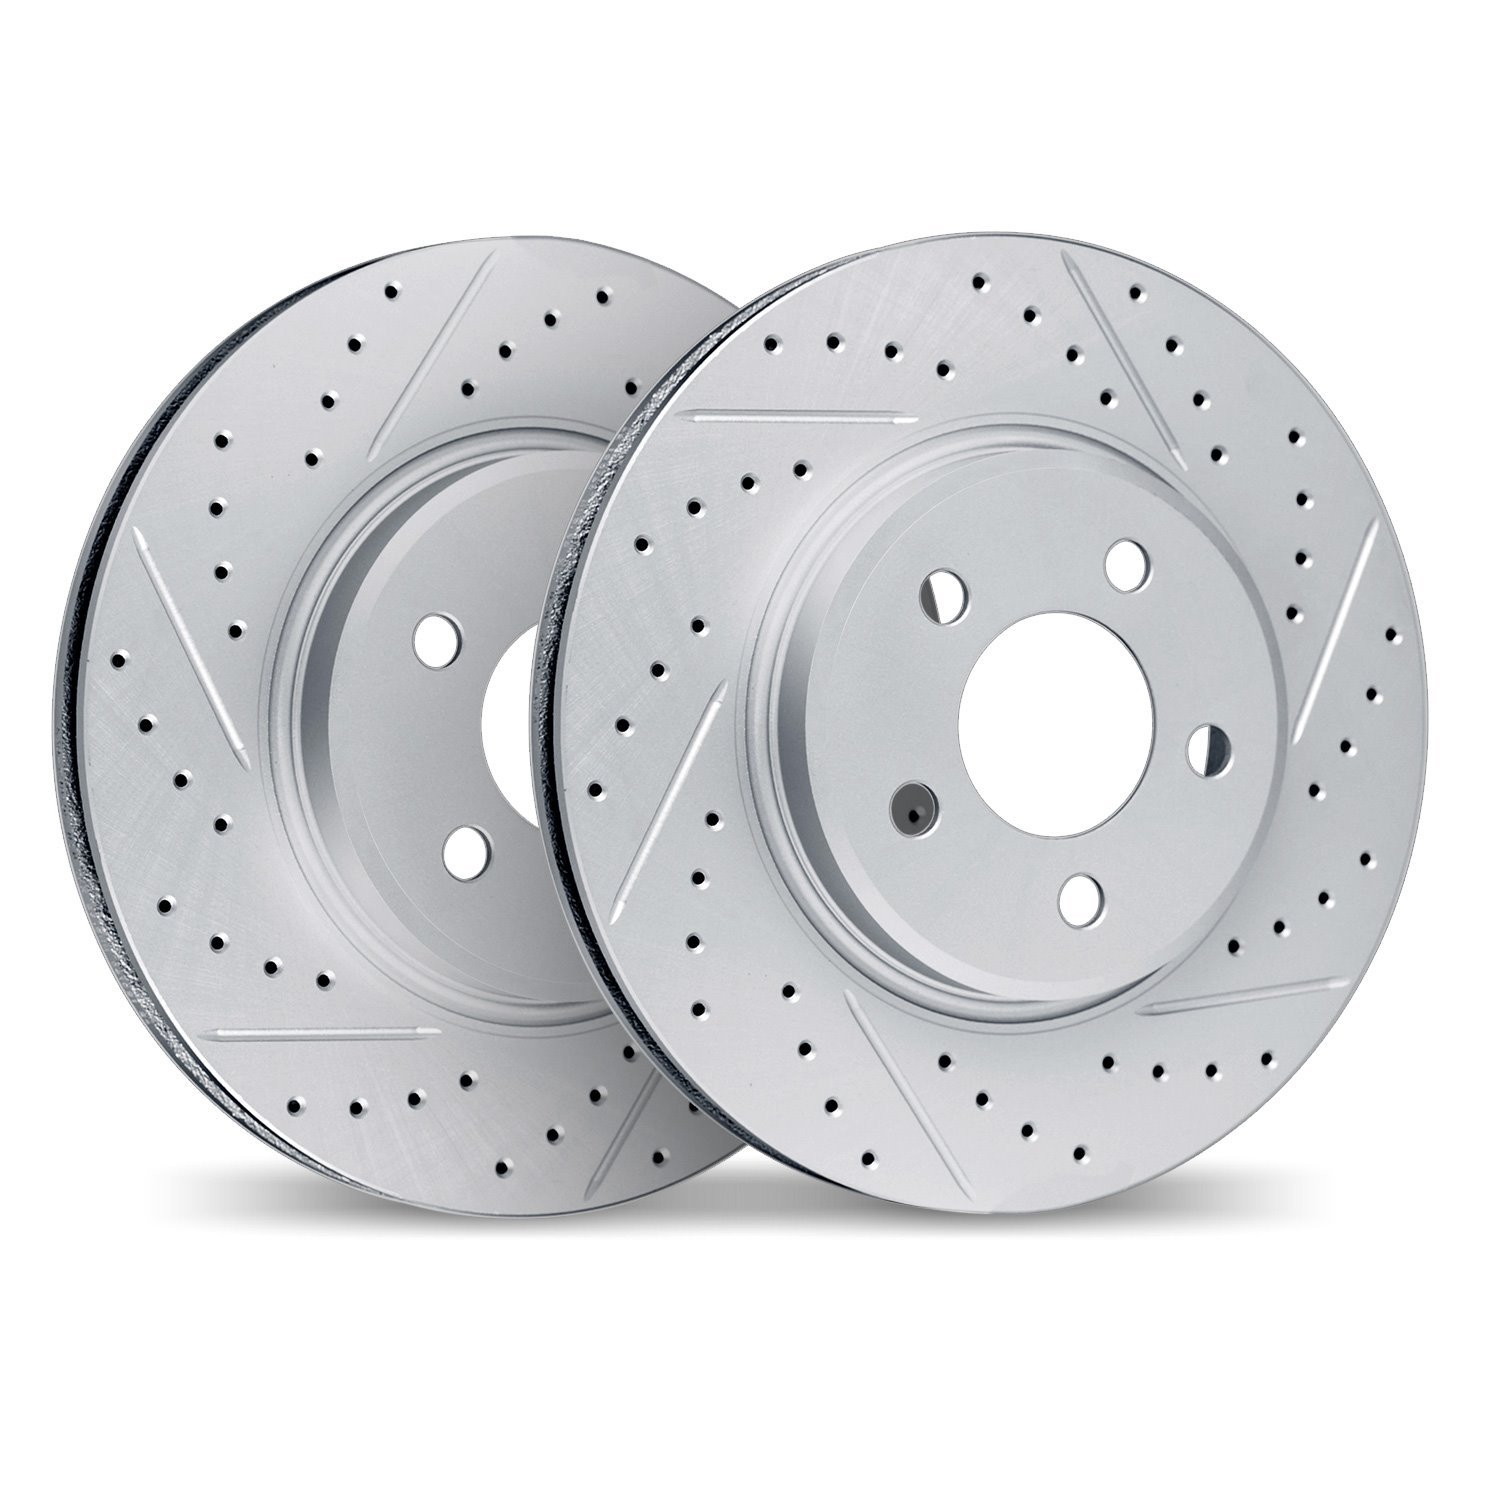 2002-52000 Geoperformance Drilled/Slotted Brake Rotors, 2004-2009 GM, Position: Front